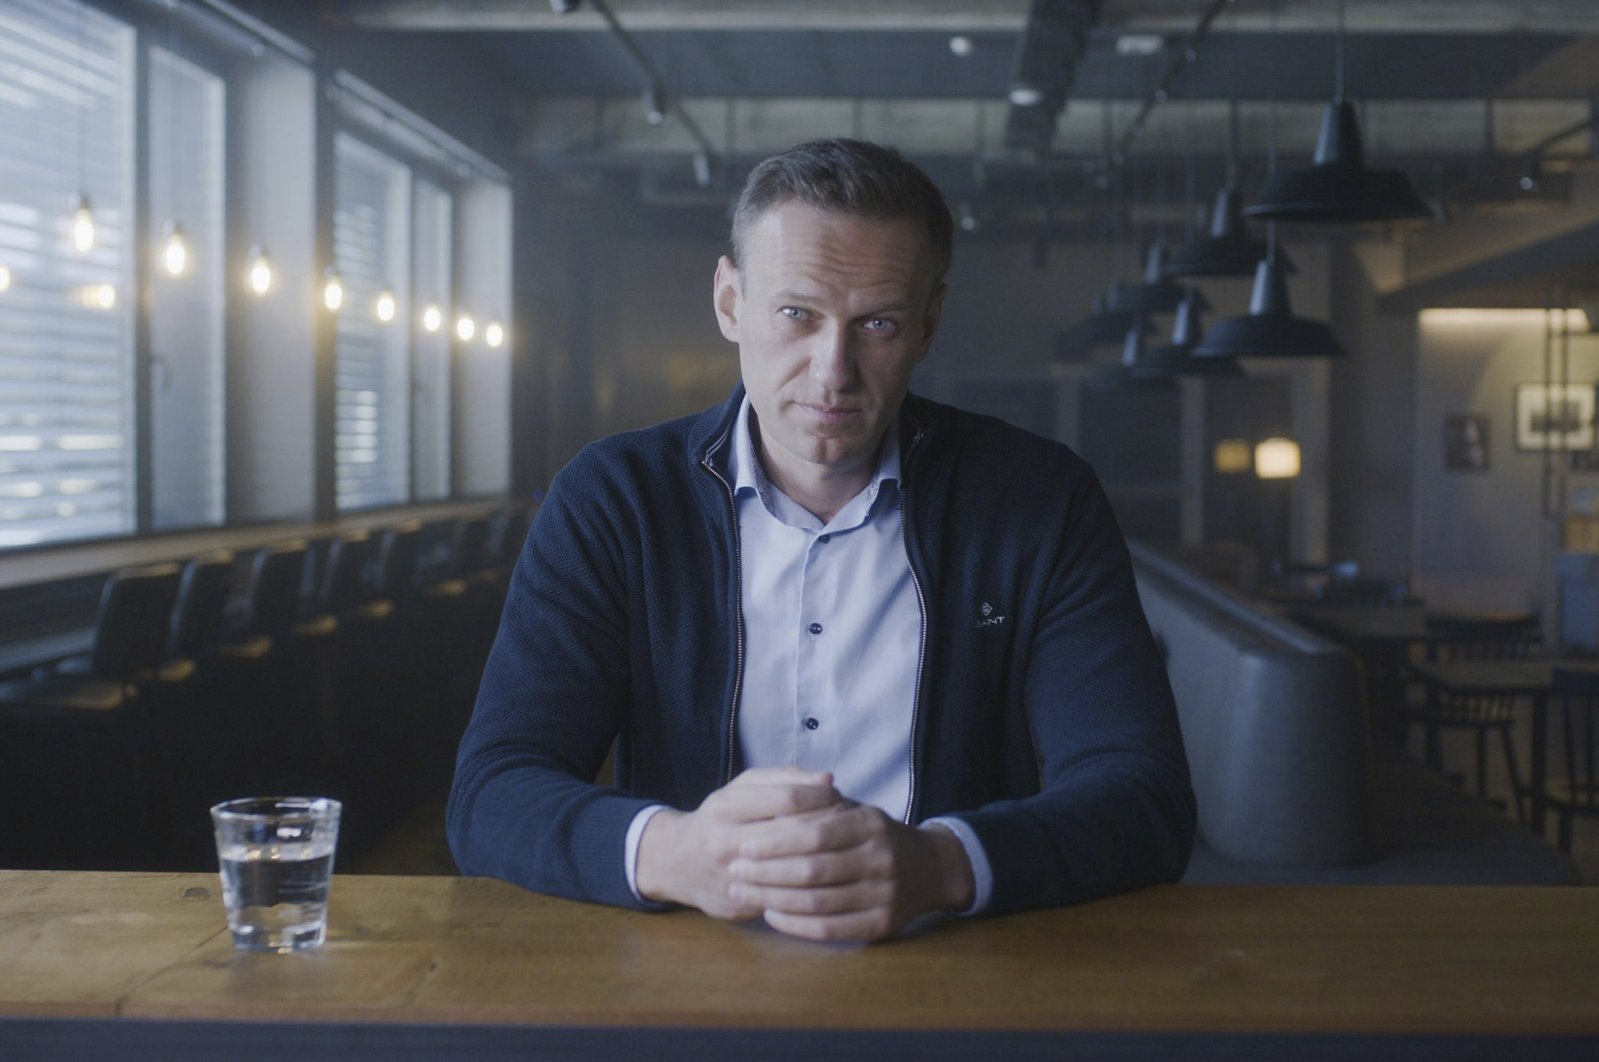 Alexei Navalny appears in a scene from &quot;Navalny&quot; an official selection of the U.S. Documentary section at the 2022 Sundance Film Festival. (AP)